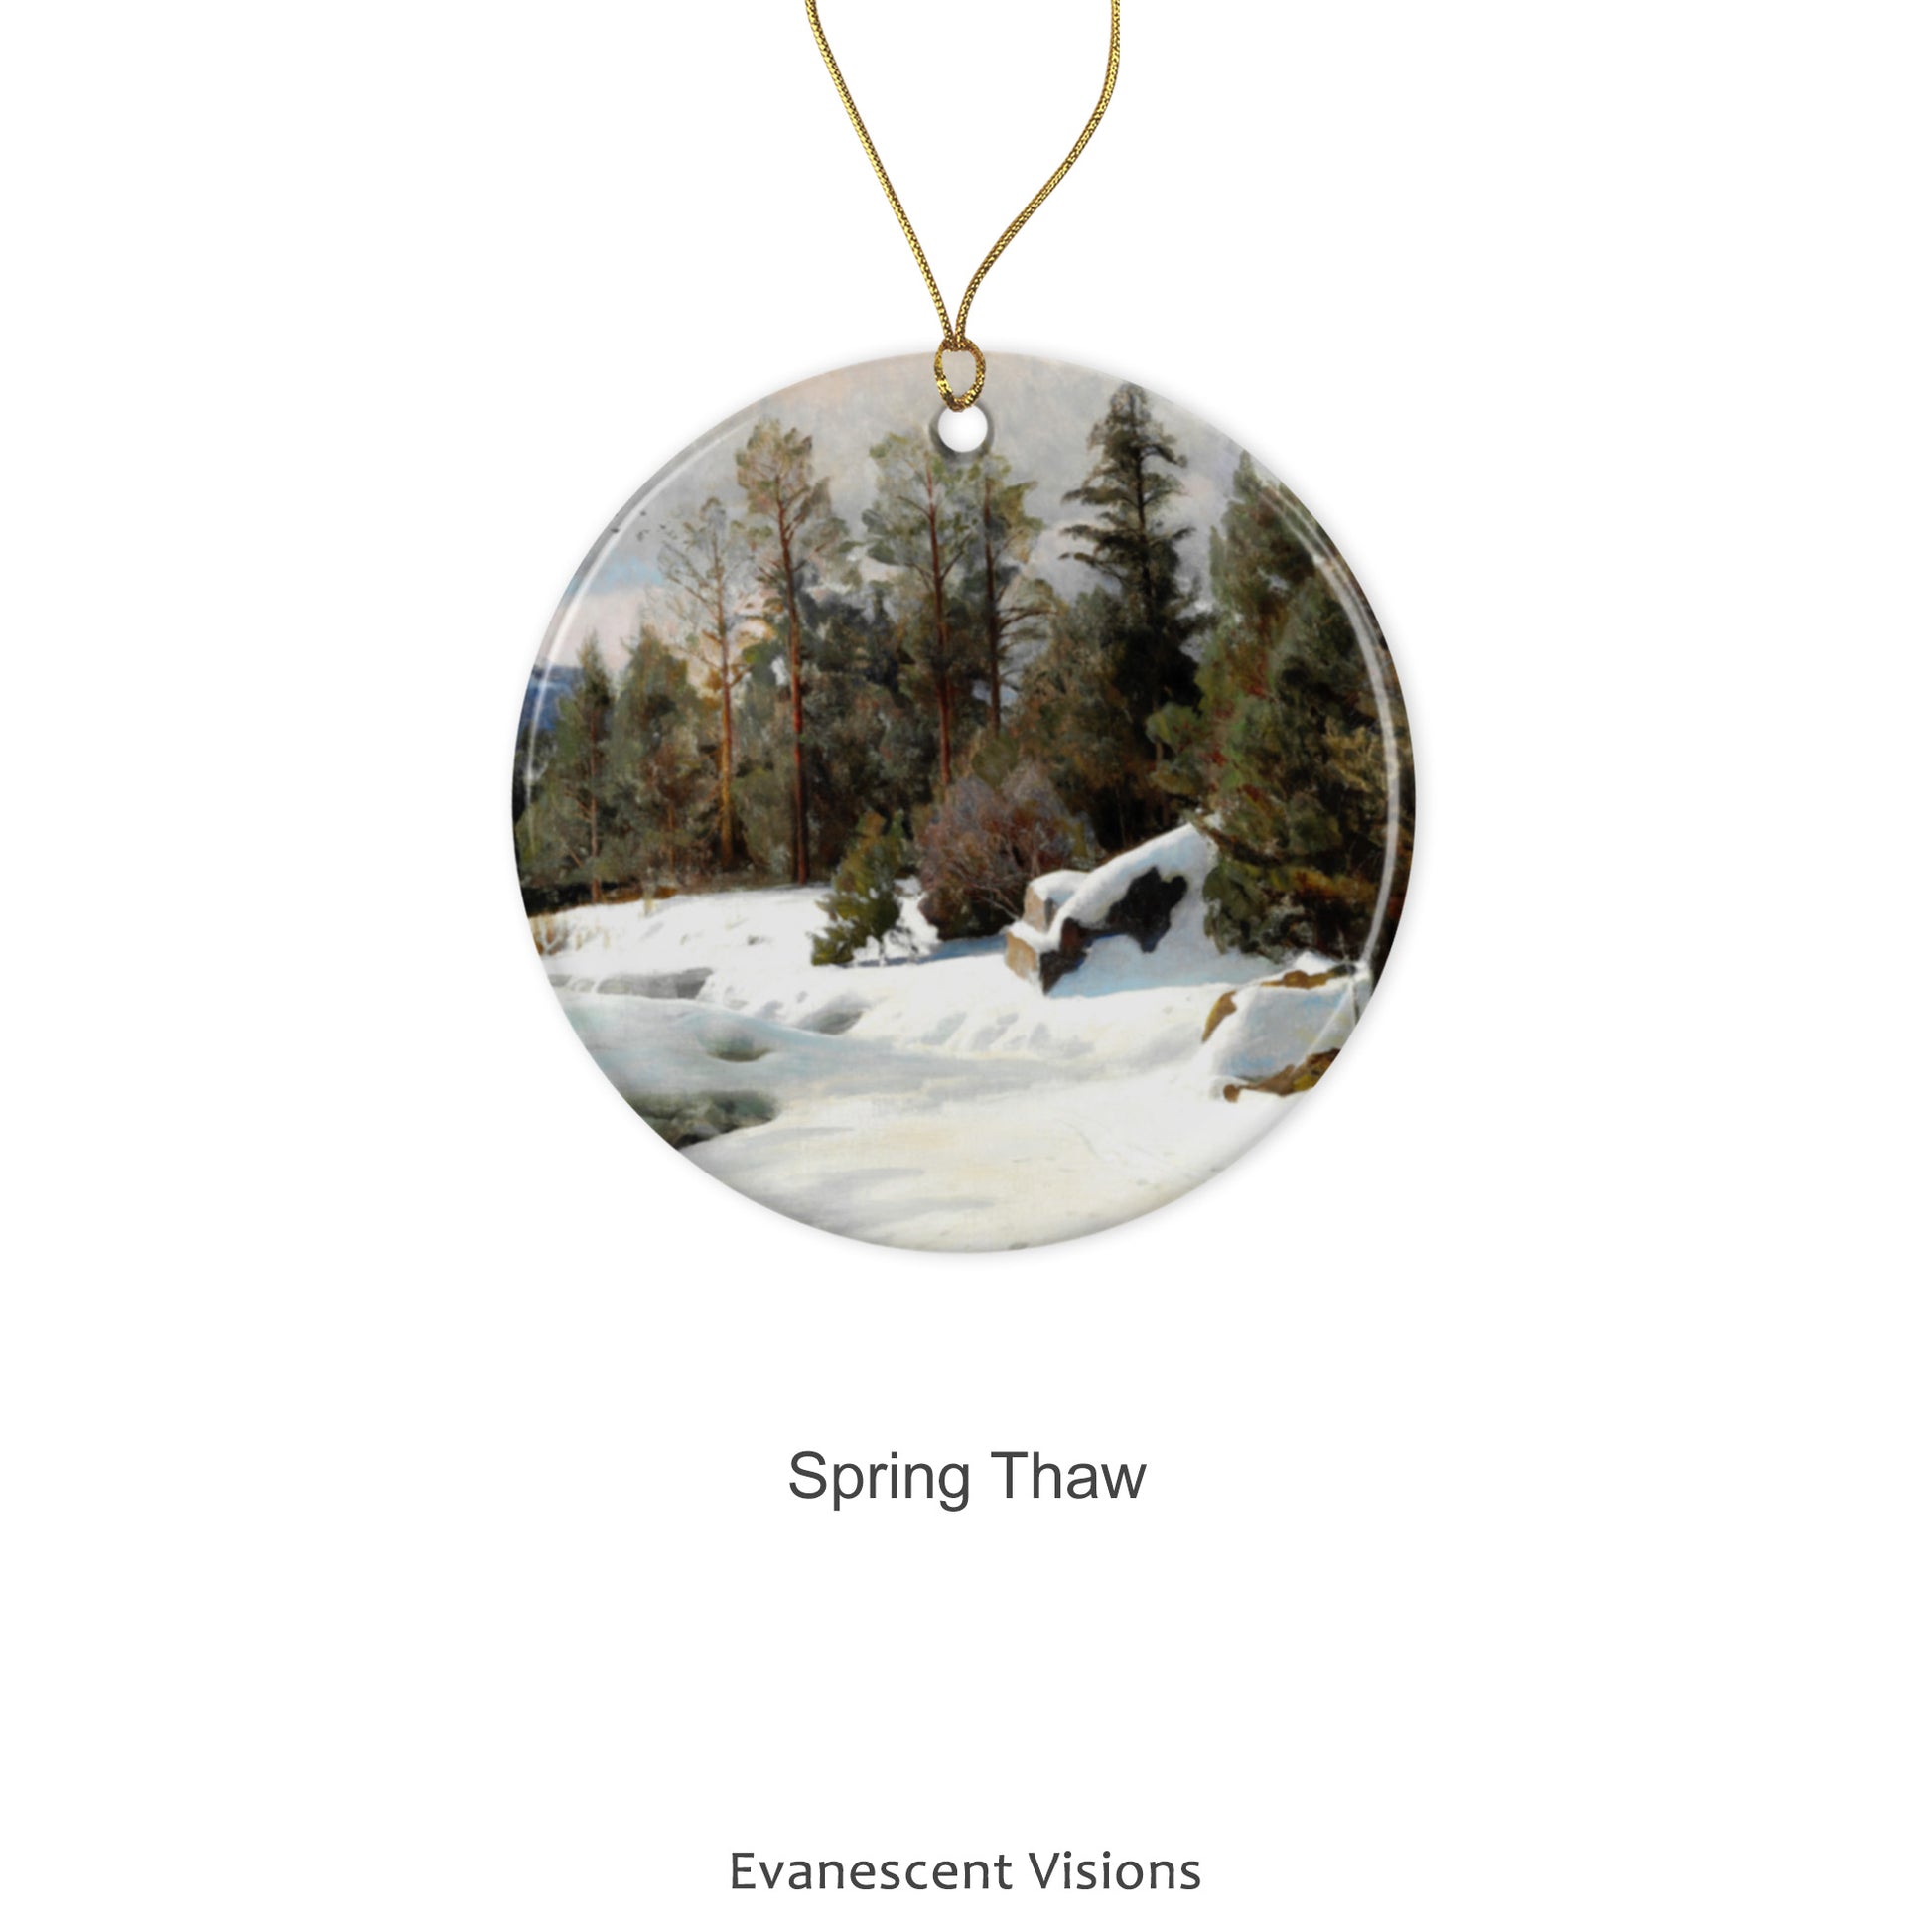 Design option 'Spring Thaw' for the Ceramic Christmas Ornament 